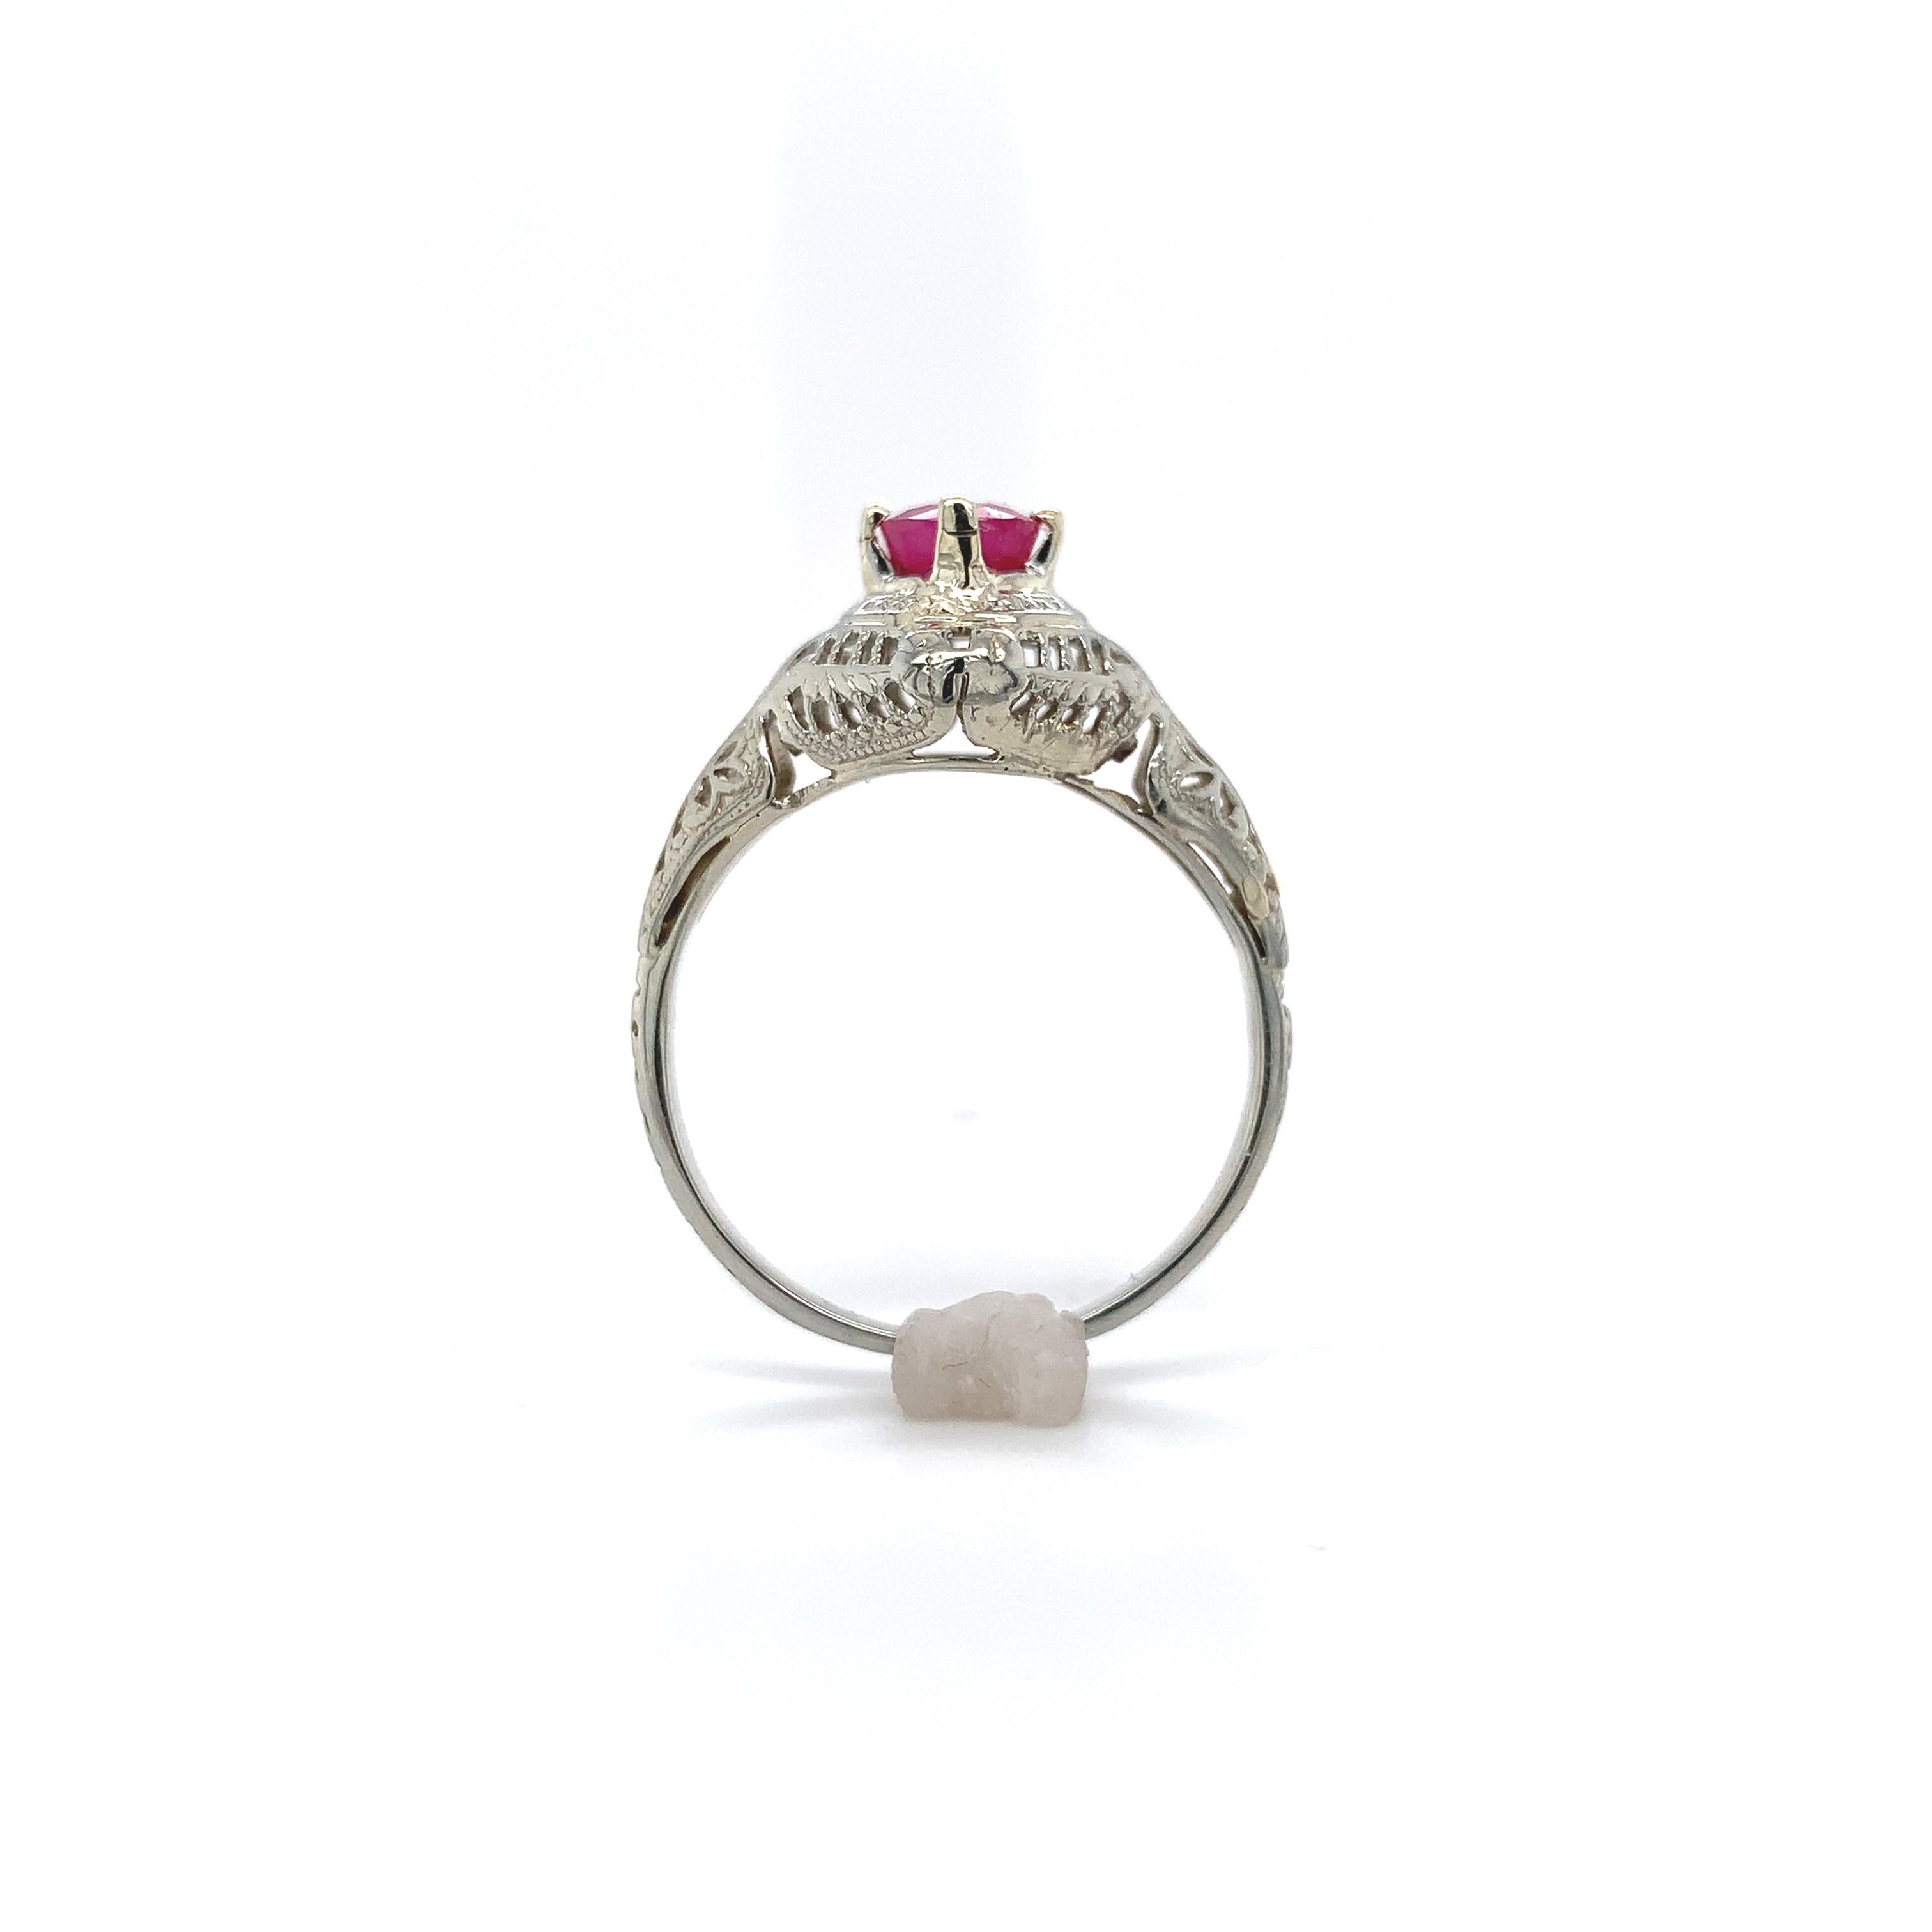 Art Deco 14K white gold filigree ruby ring. The ring features a genuine earth mined round pinkish-red ruby weighing .66cts. The ruby measures about 4.7mm. The ring has all new prongs. The ring fits a size 7 finger. It weighs 1.62dwt and dates from